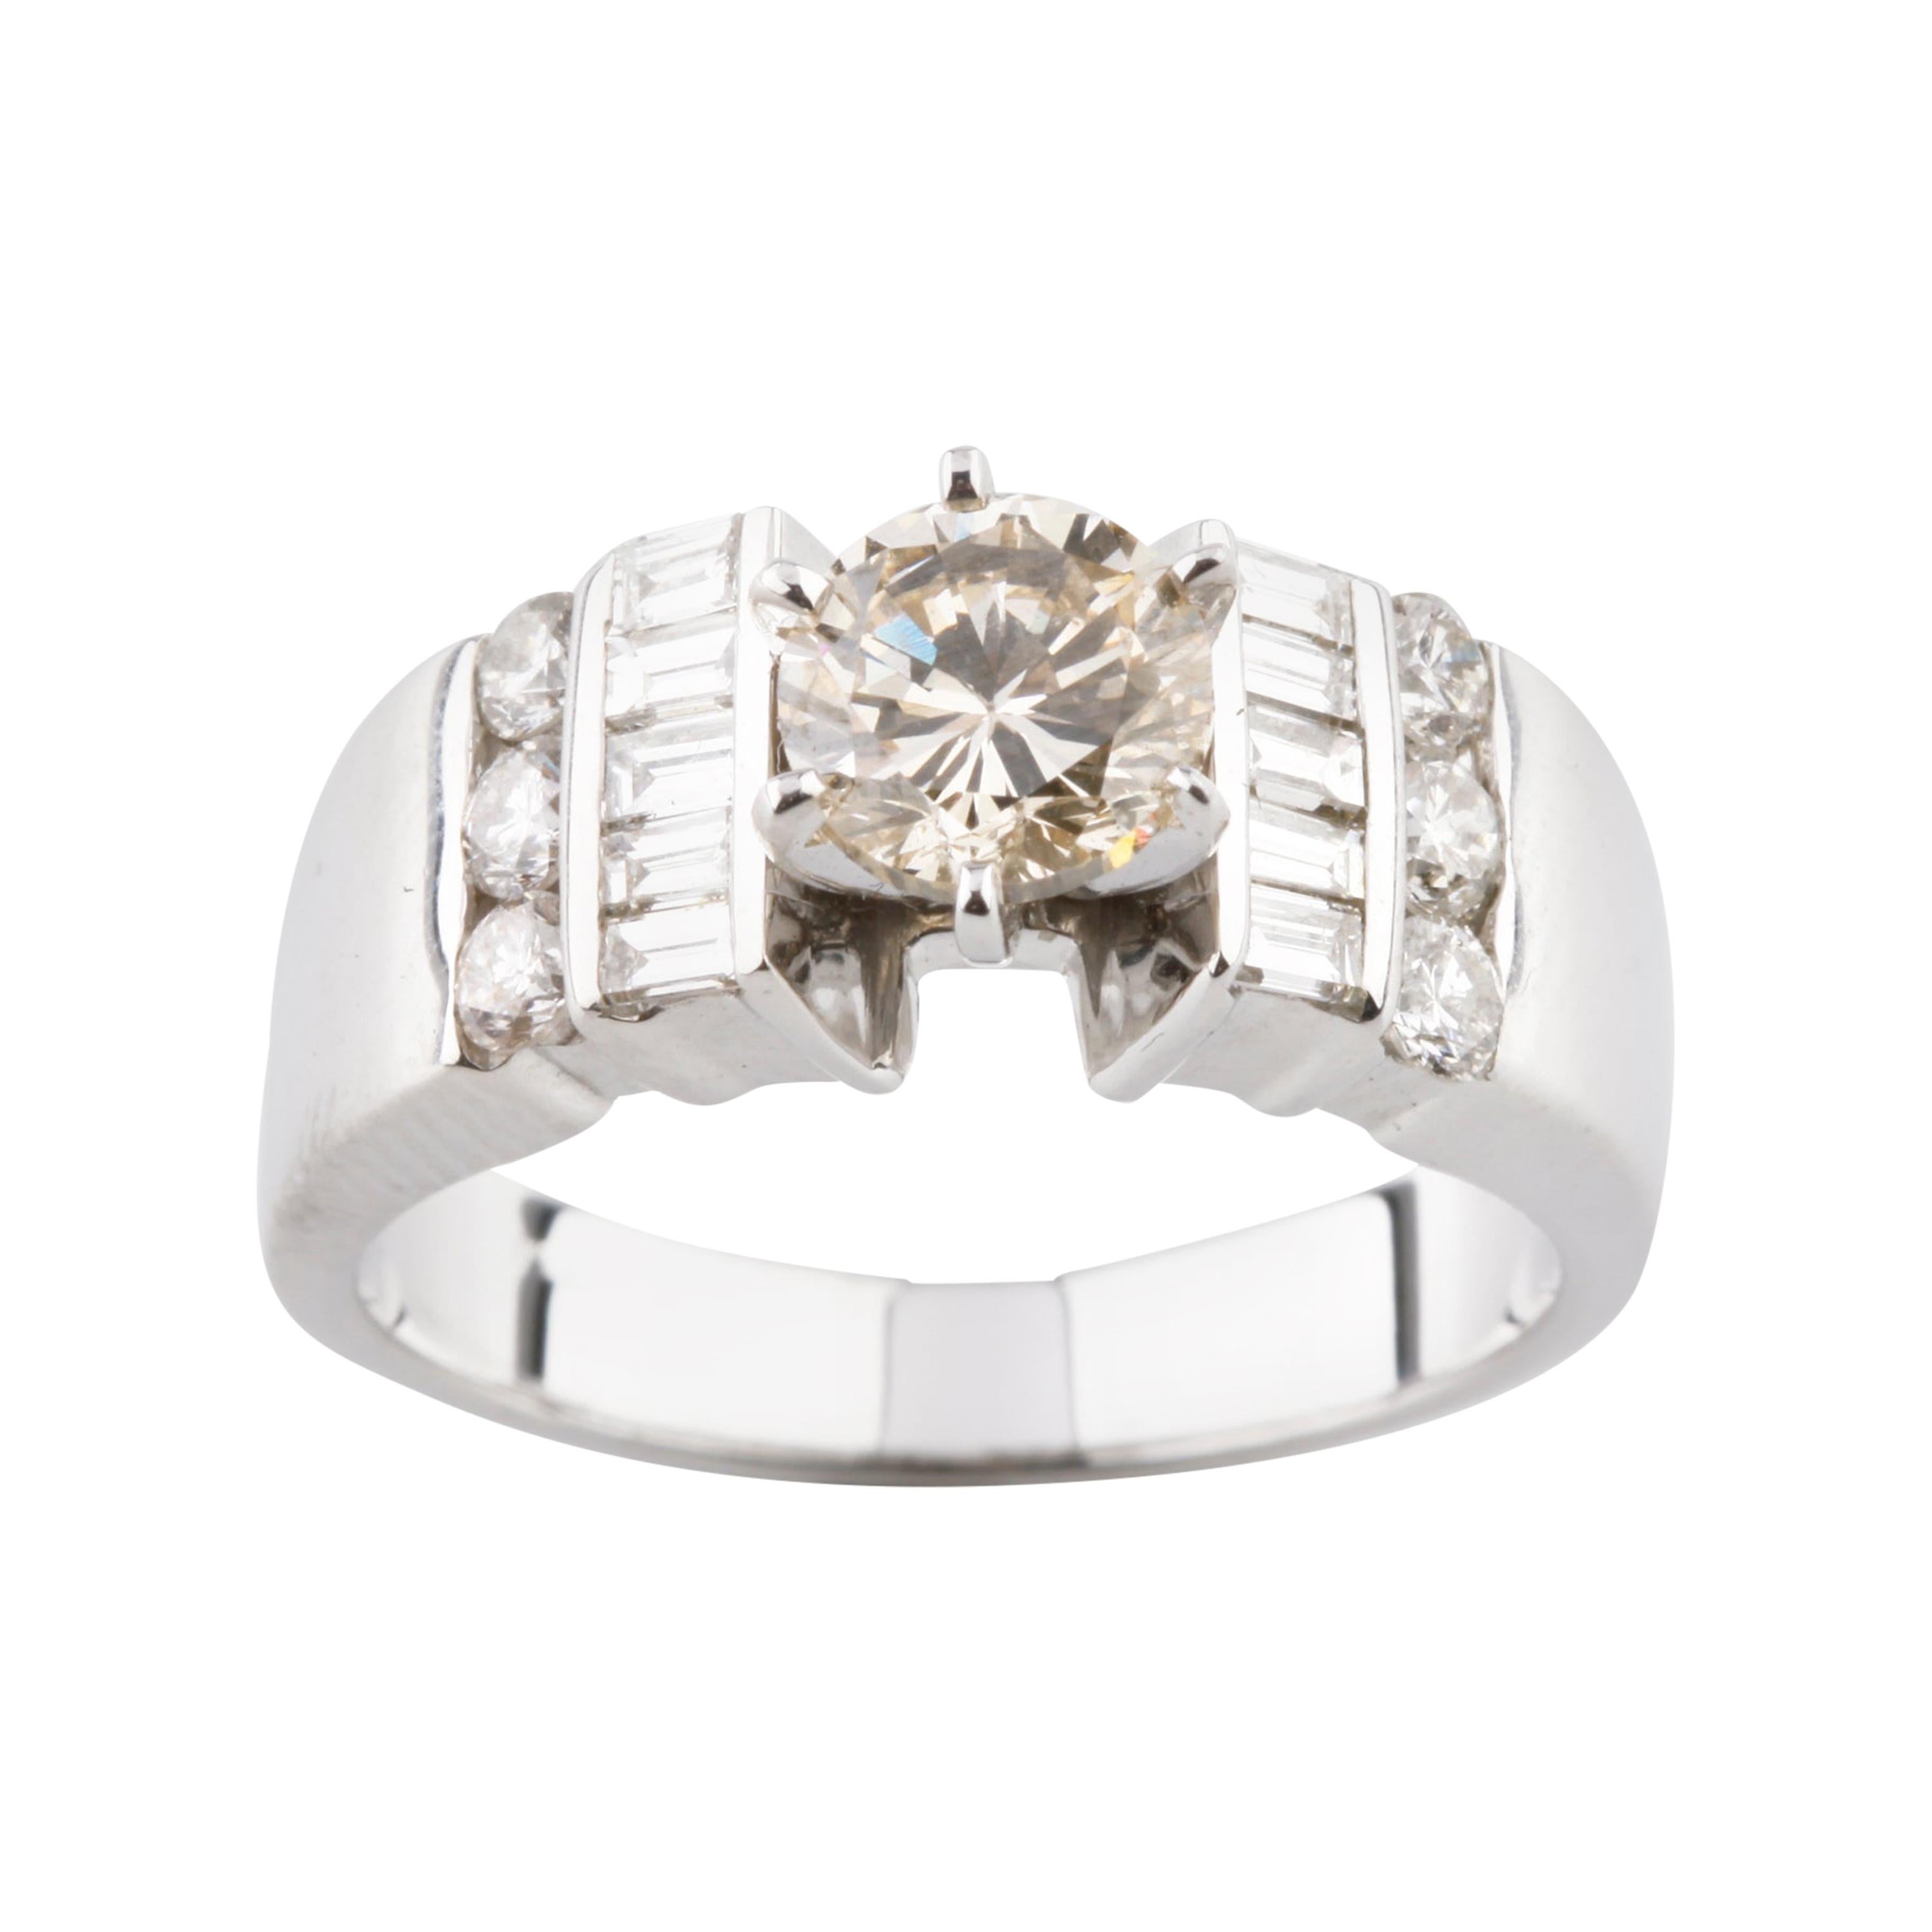 .92 Carat Round Diamond Solitaire Ring with Accent Stones in White Gold